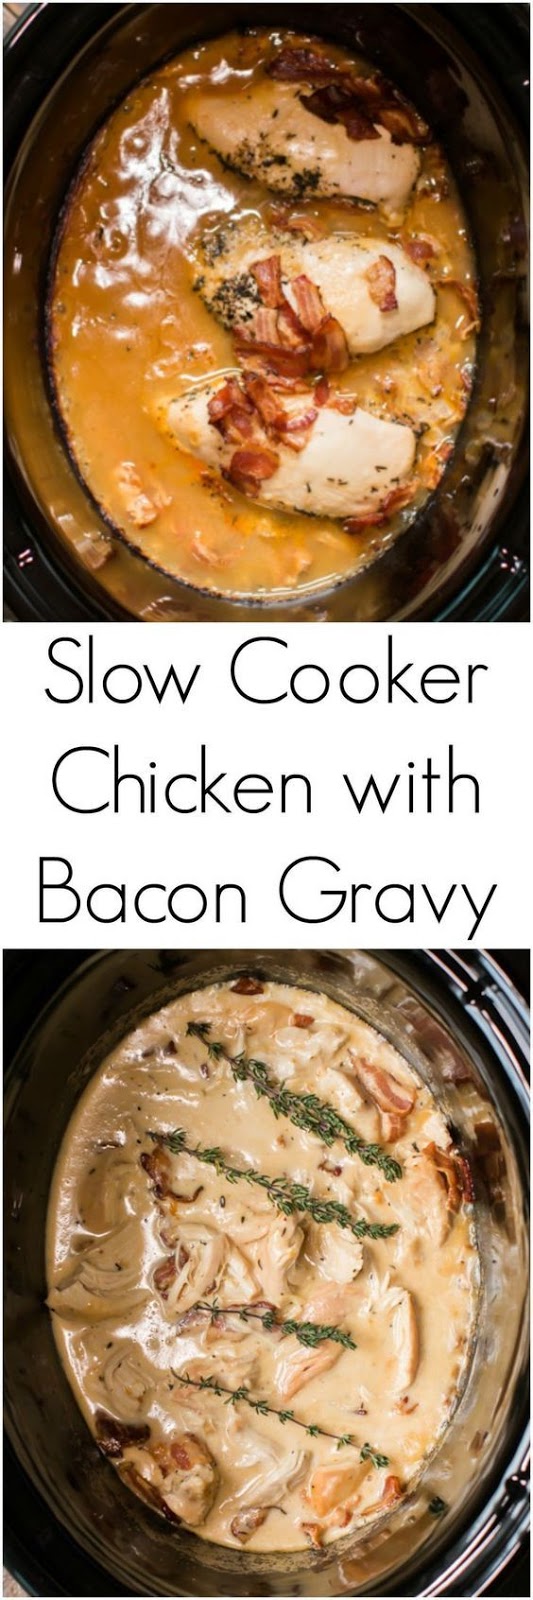 SLOW COOKER CHICKEN WITH BACON GRAVY by , Slow Cooker Recipes 2018-10-24